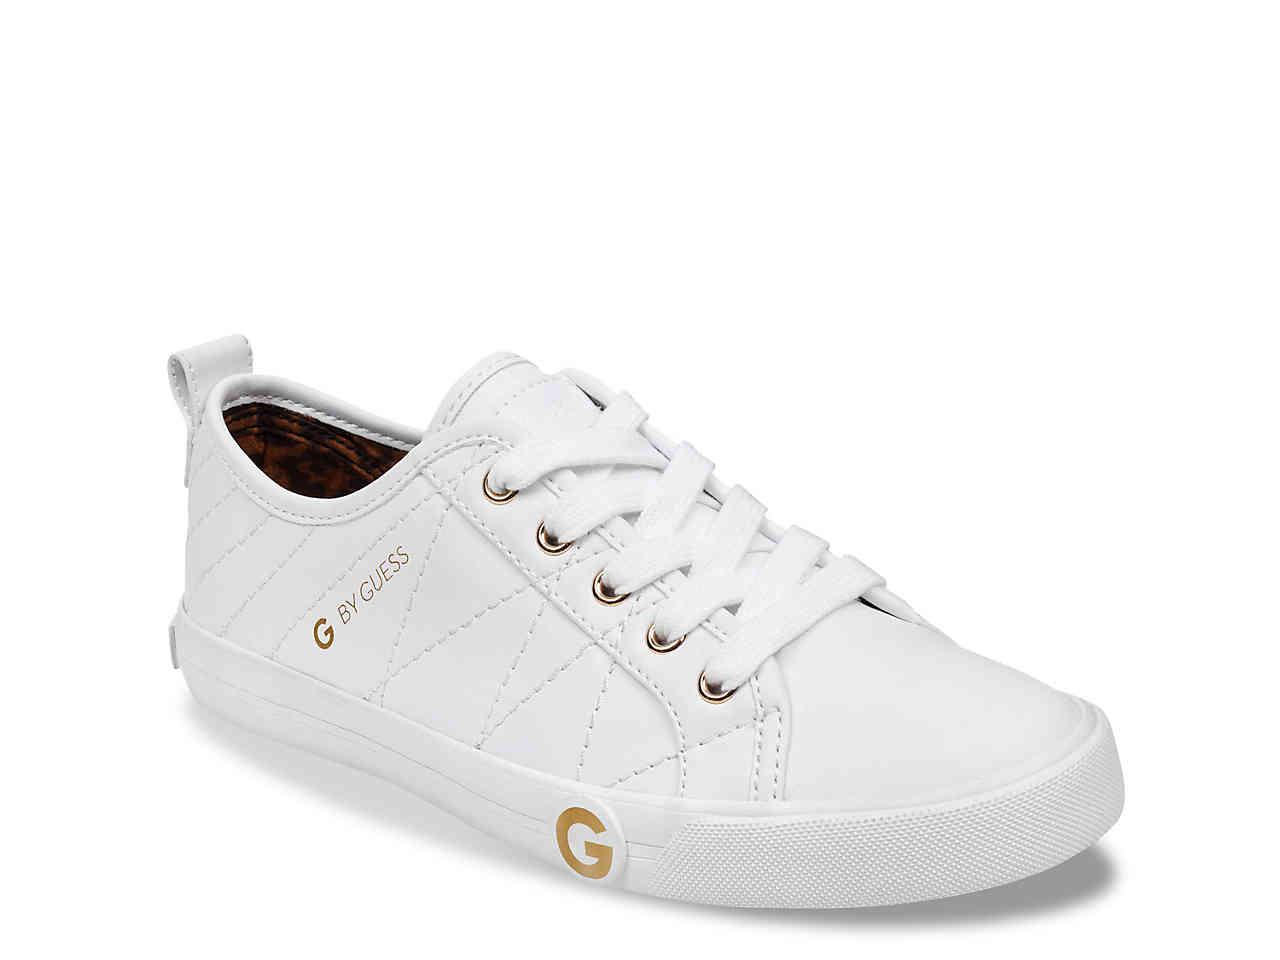 G by Guess Orfin Sneaker in White - Lyst